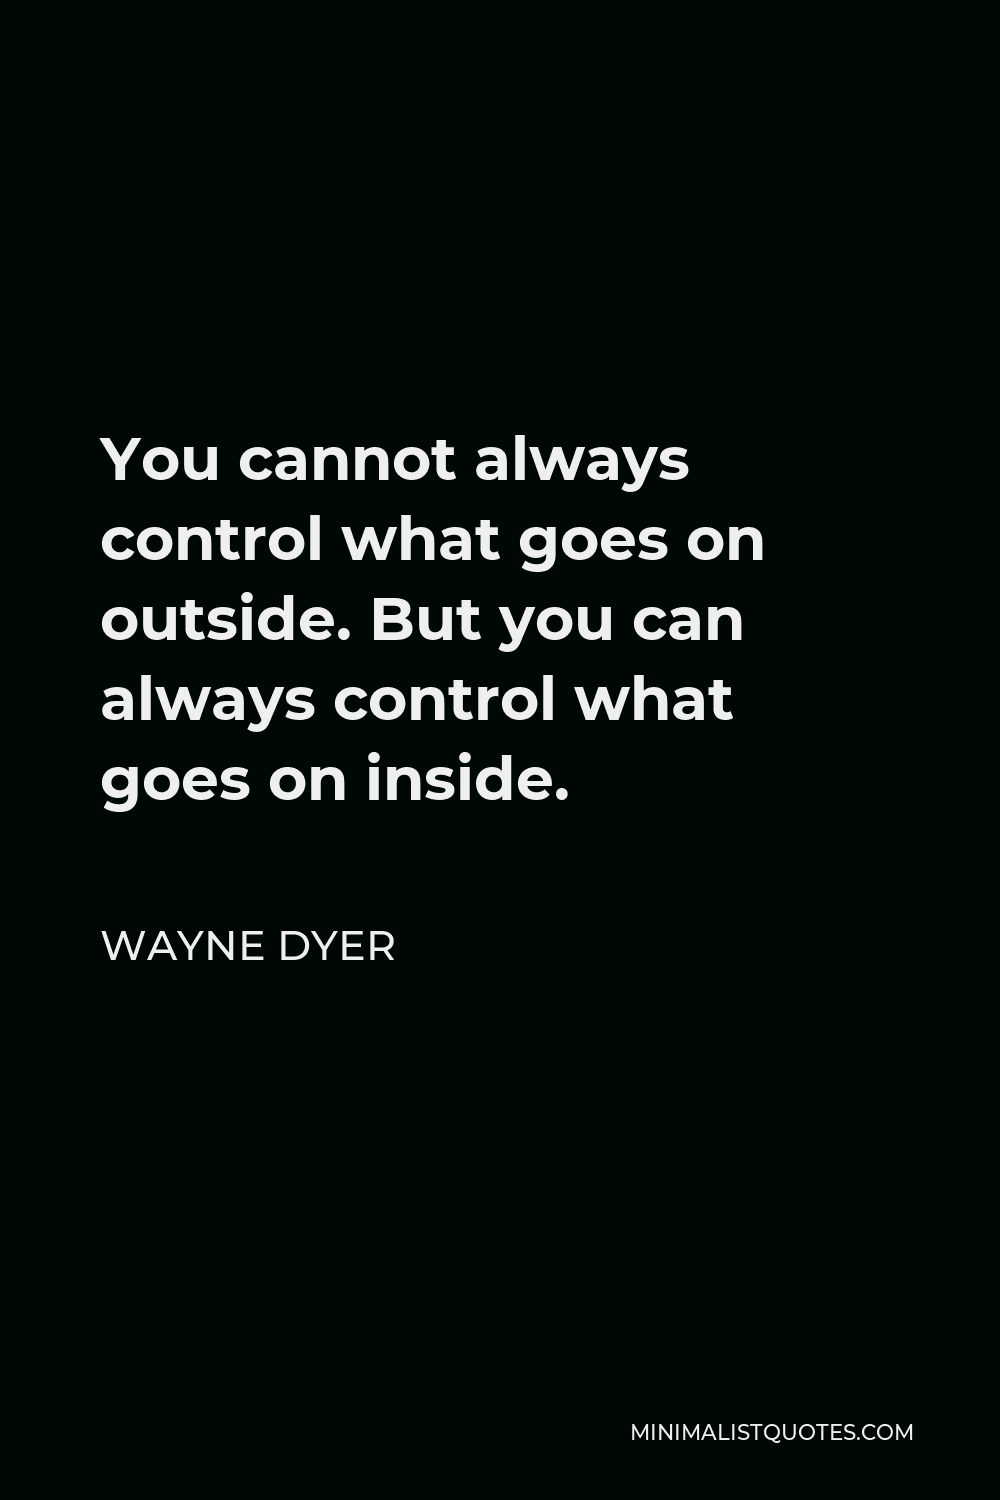 Wayne Dyer Quote: You cannot always control what goes on outside. But ...